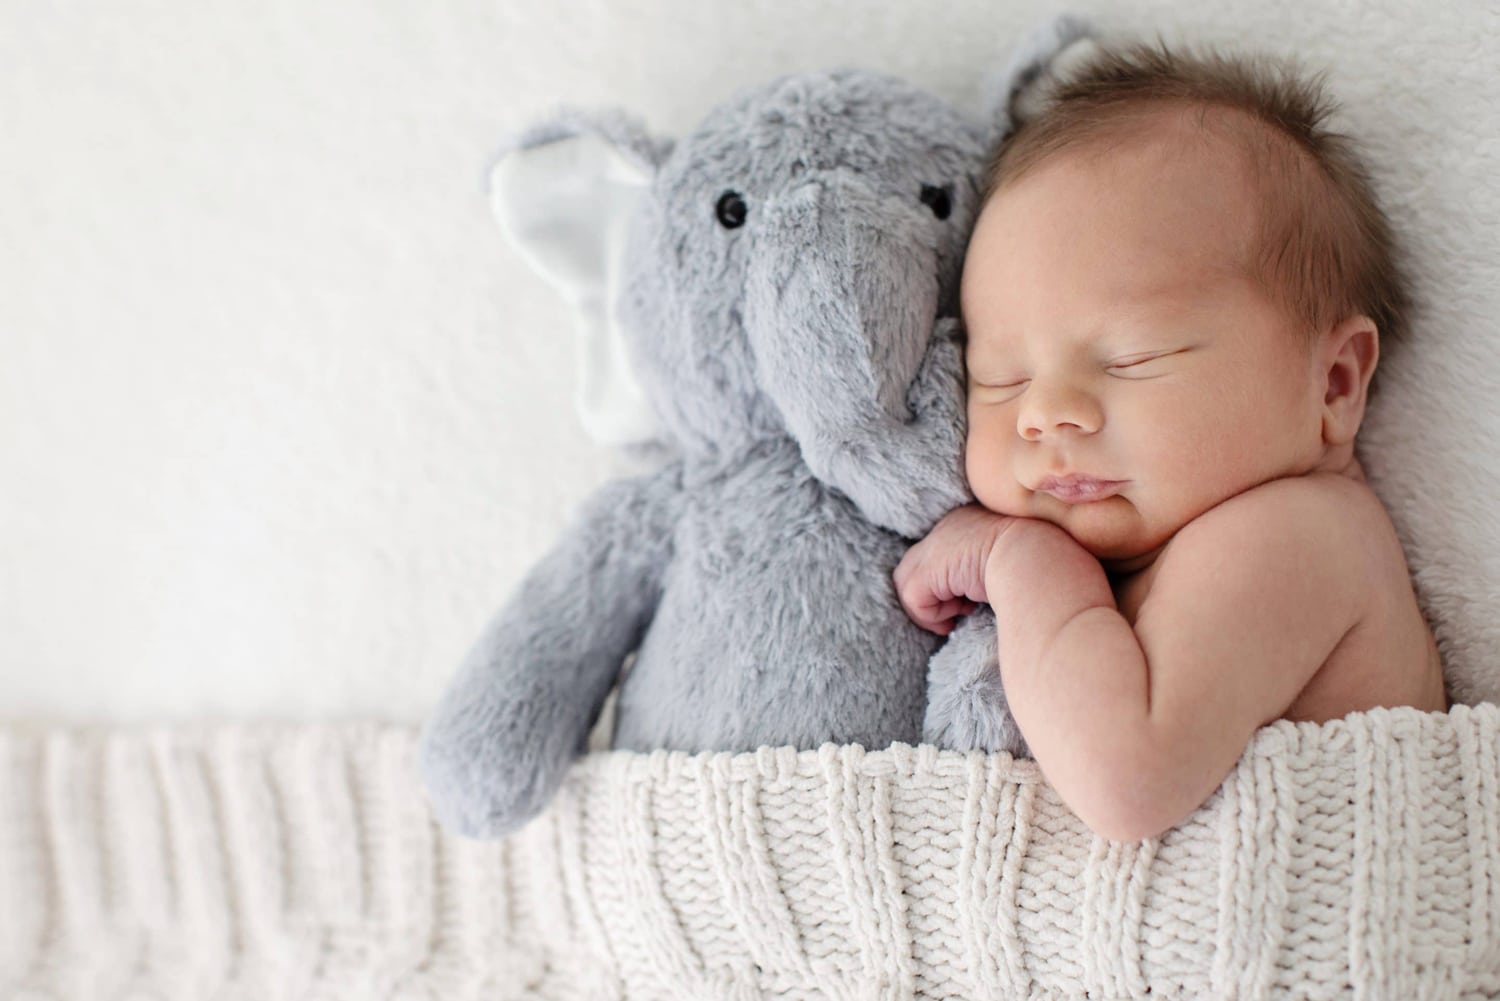 A baby clutches a gray stuffed elephant.